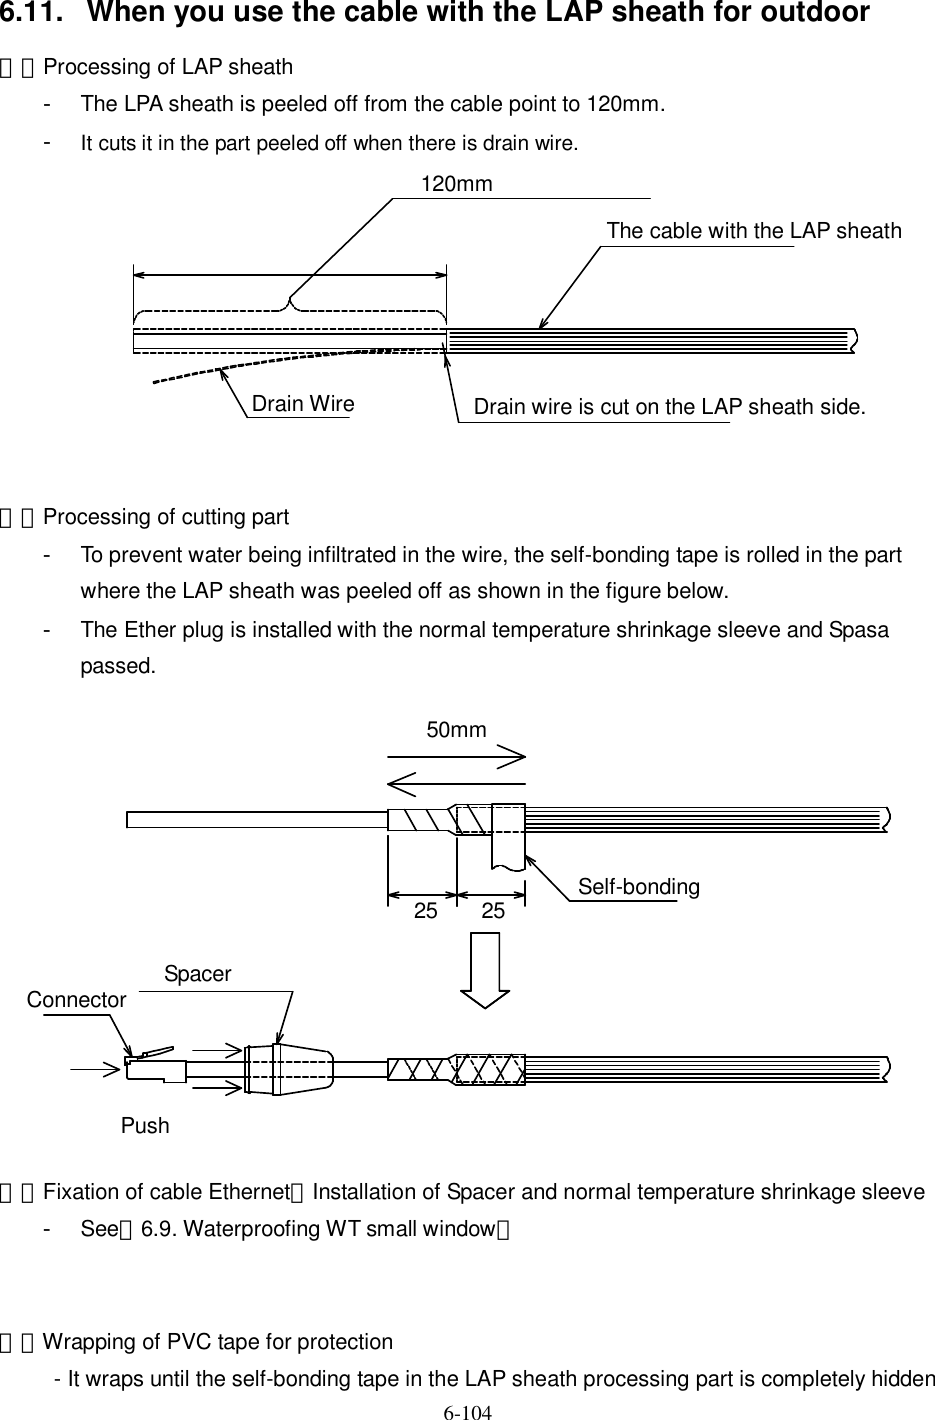   6-104   6.11.  When you use the cable with the LAP sheath for outdoor １．Processing of LAP sheath -  The LPA sheath is peeled off from the cable point to 120mm. -  It cuts it in the part peeled off when there is drain wire.          ２．Processing of cutting part -  To prevent water being infiltrated in the wire, the self-bonding tape is rolled in the part where the LAP sheath was peeled off as shown in the figure below. -  The Ether plug is installed with the normal temperature shrinkage sleeve and Spasa passed.              ３．Fixation of cable Ethernet、Installation of Spacer and normal temperature shrinkage sleeve -  See「6.9. Waterproofing WT small window」   ４．Wrapping of PVC tape for protection   - It wraps until the self-bonding tape in the LAP sheath processing part is completely hidden 120mm The cable with the LAP sheath Drain wire is cut on the LAP sheath side. Drain Wire 50mm 25 25 Self-bonding Spacer Connector Push 